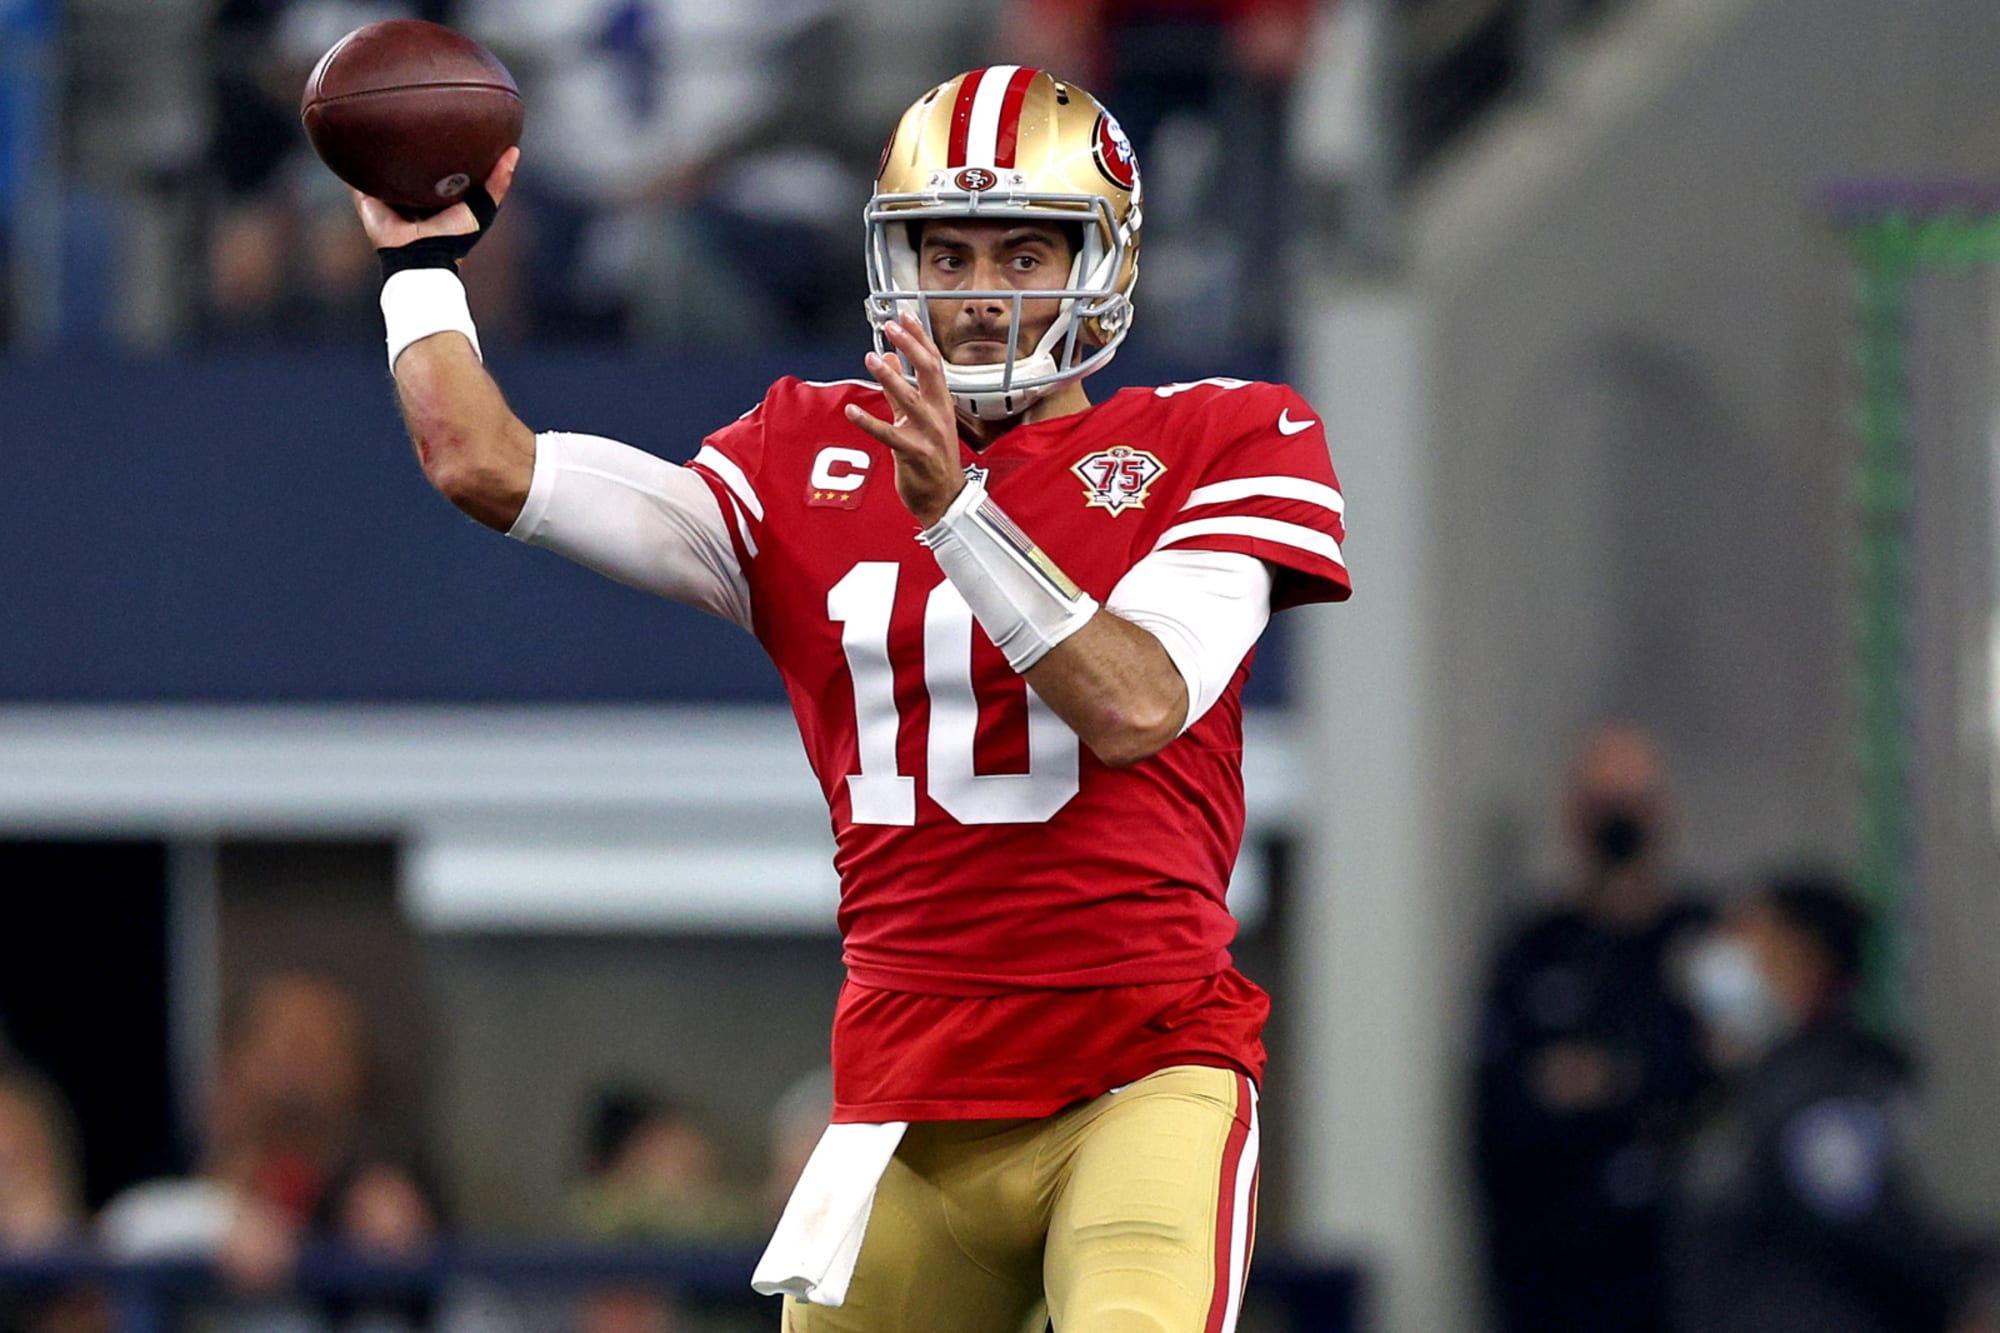 San Francisco Niners Team is a Super Bowl Contender with Jimmy